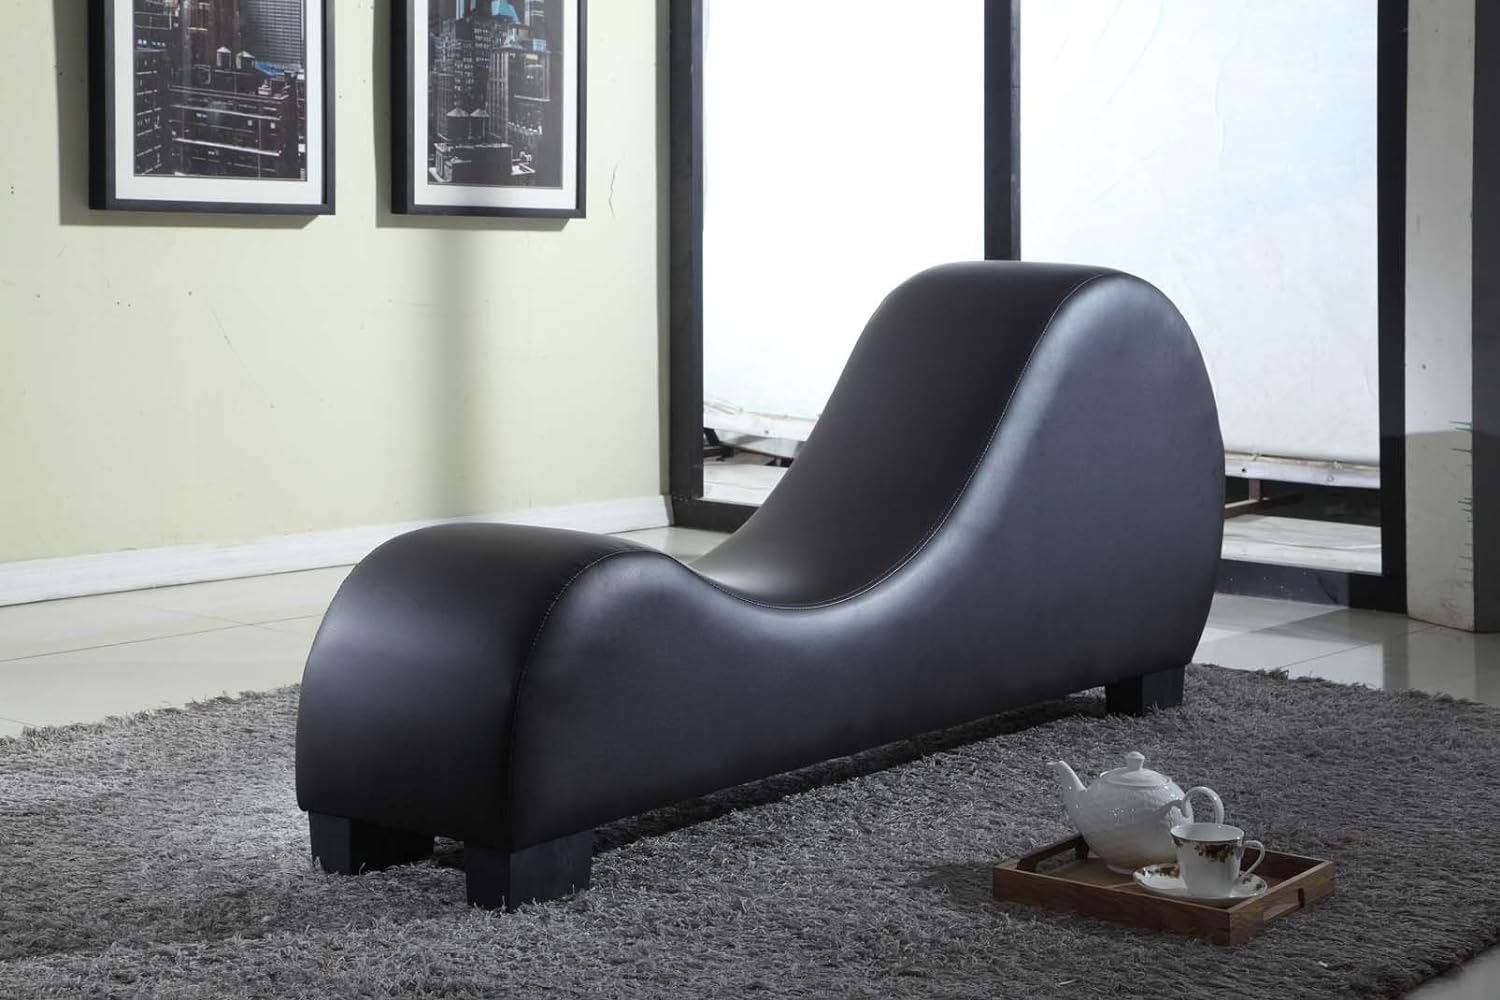 How To Use A Yoga Chaise Lounge